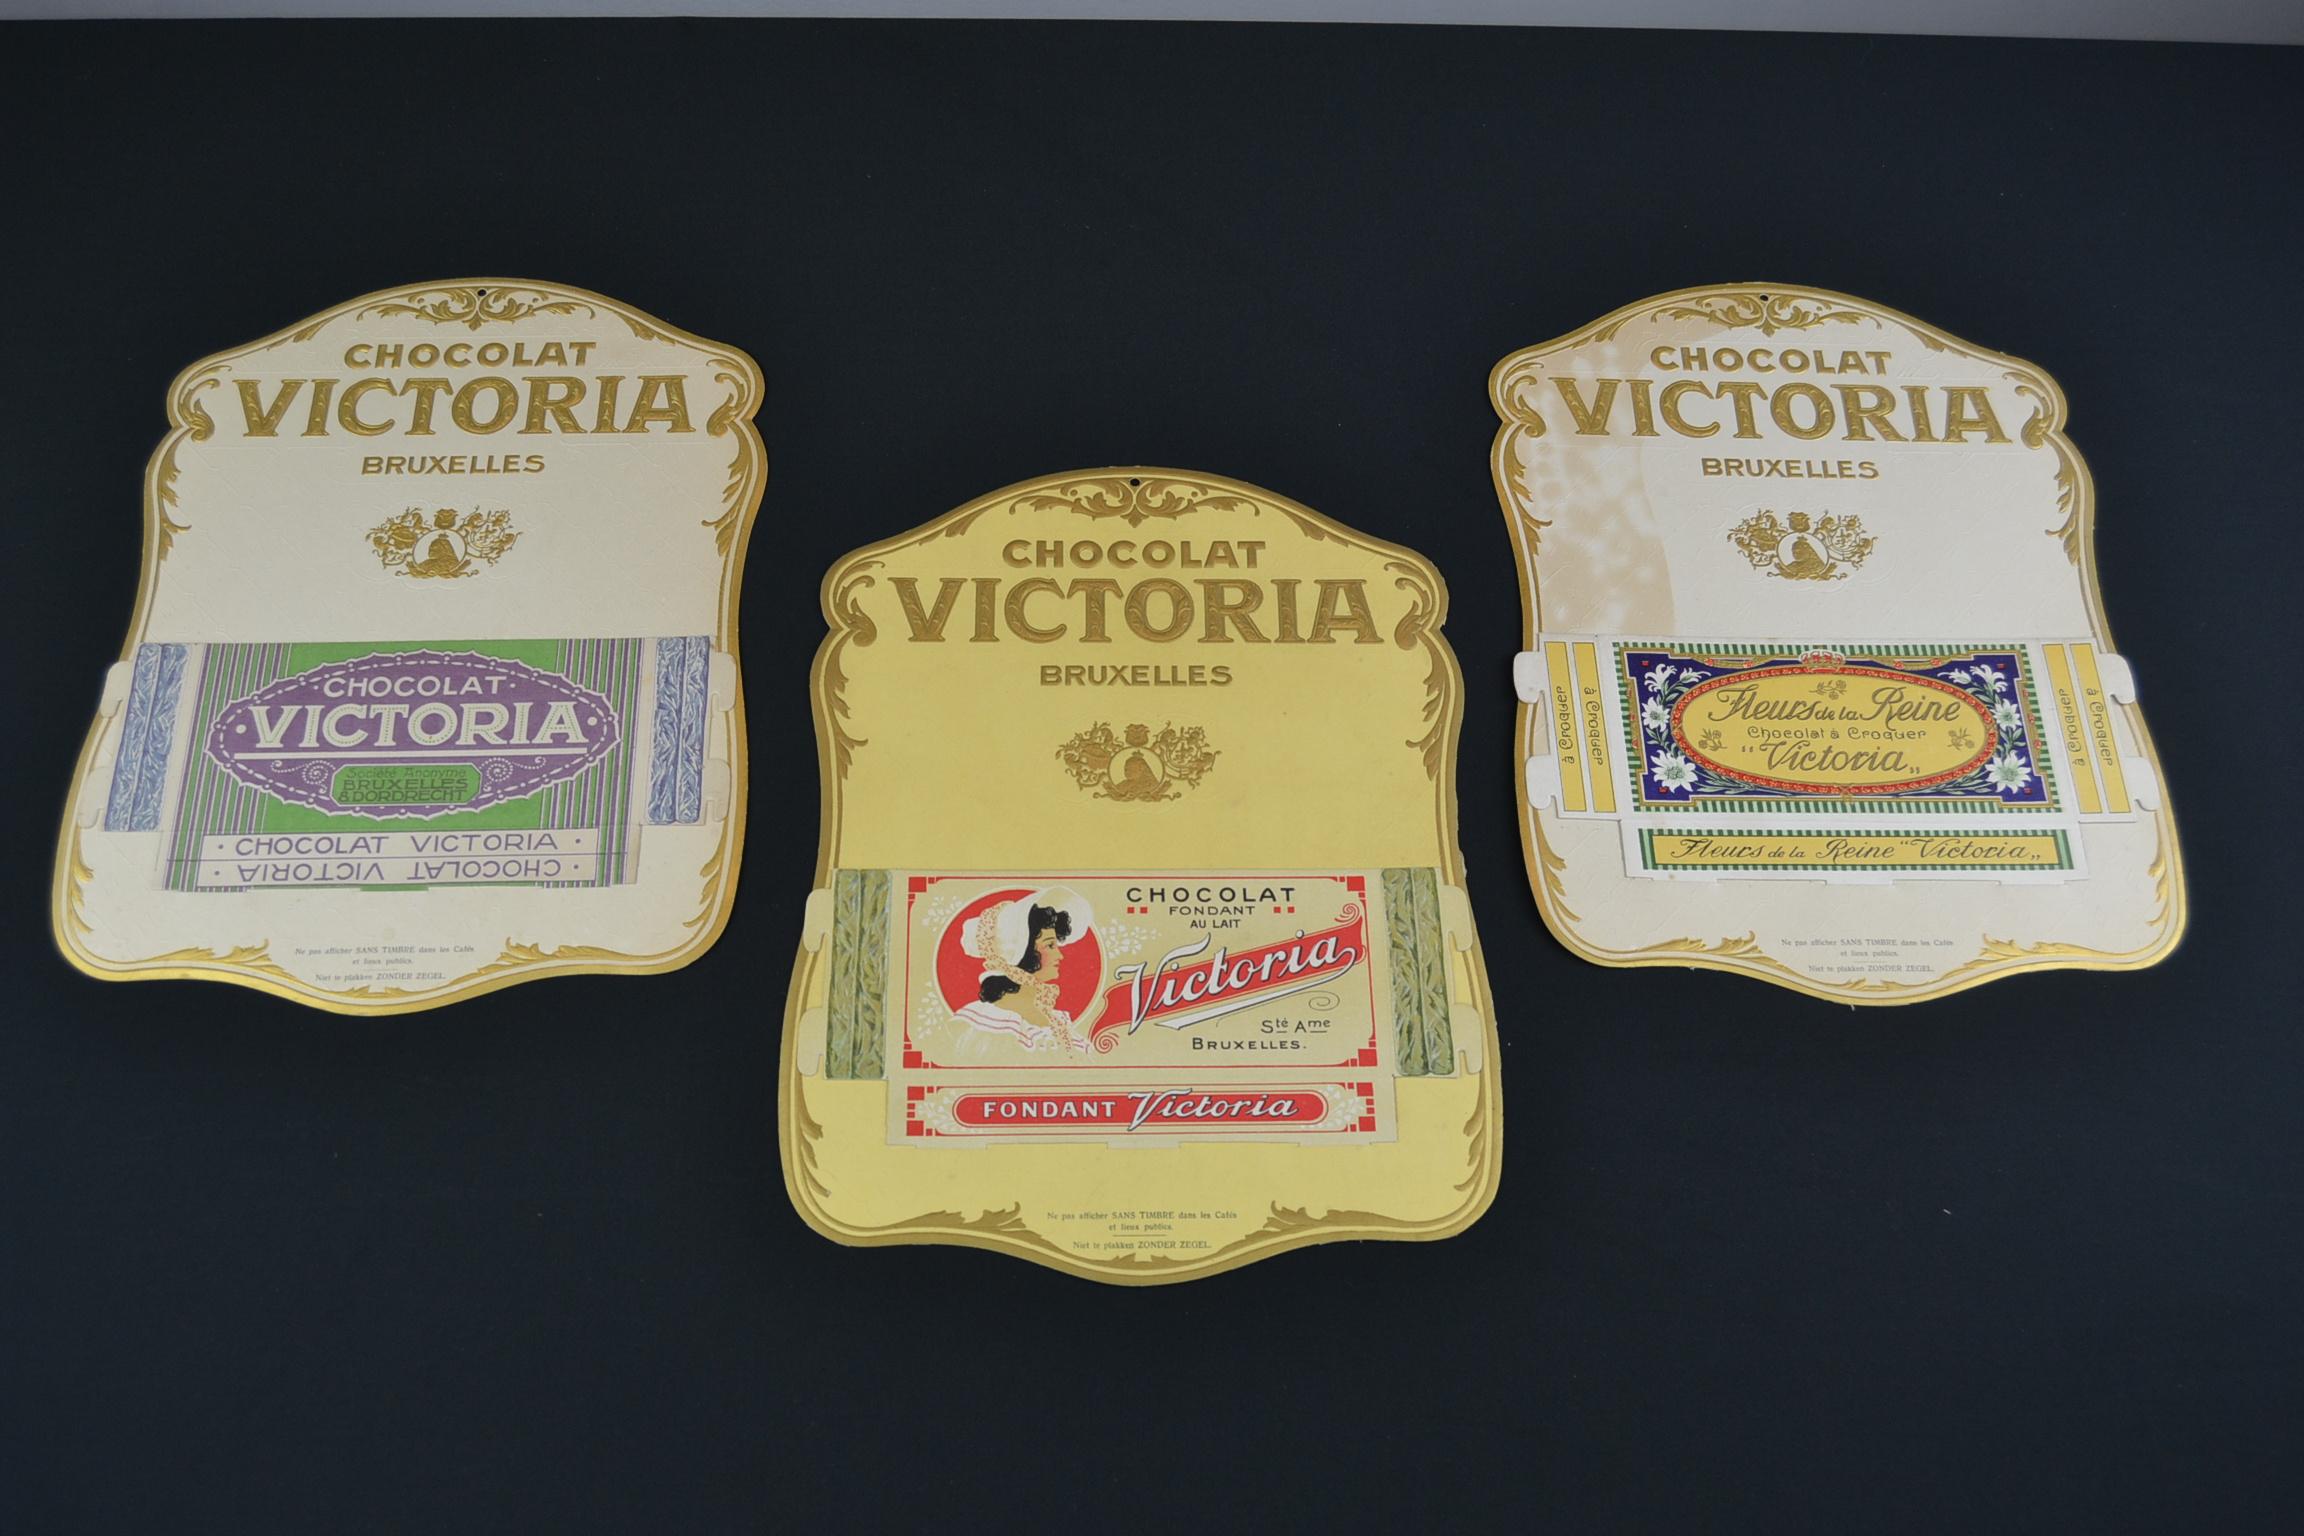 Antique advertising signs for Chocolate Victoria Brussels. These old advertising signs - advertising displays for Belgian Chocolate will be sold as a set of 3.

These displays are made of cardboard with gold lettering and details in relief on the